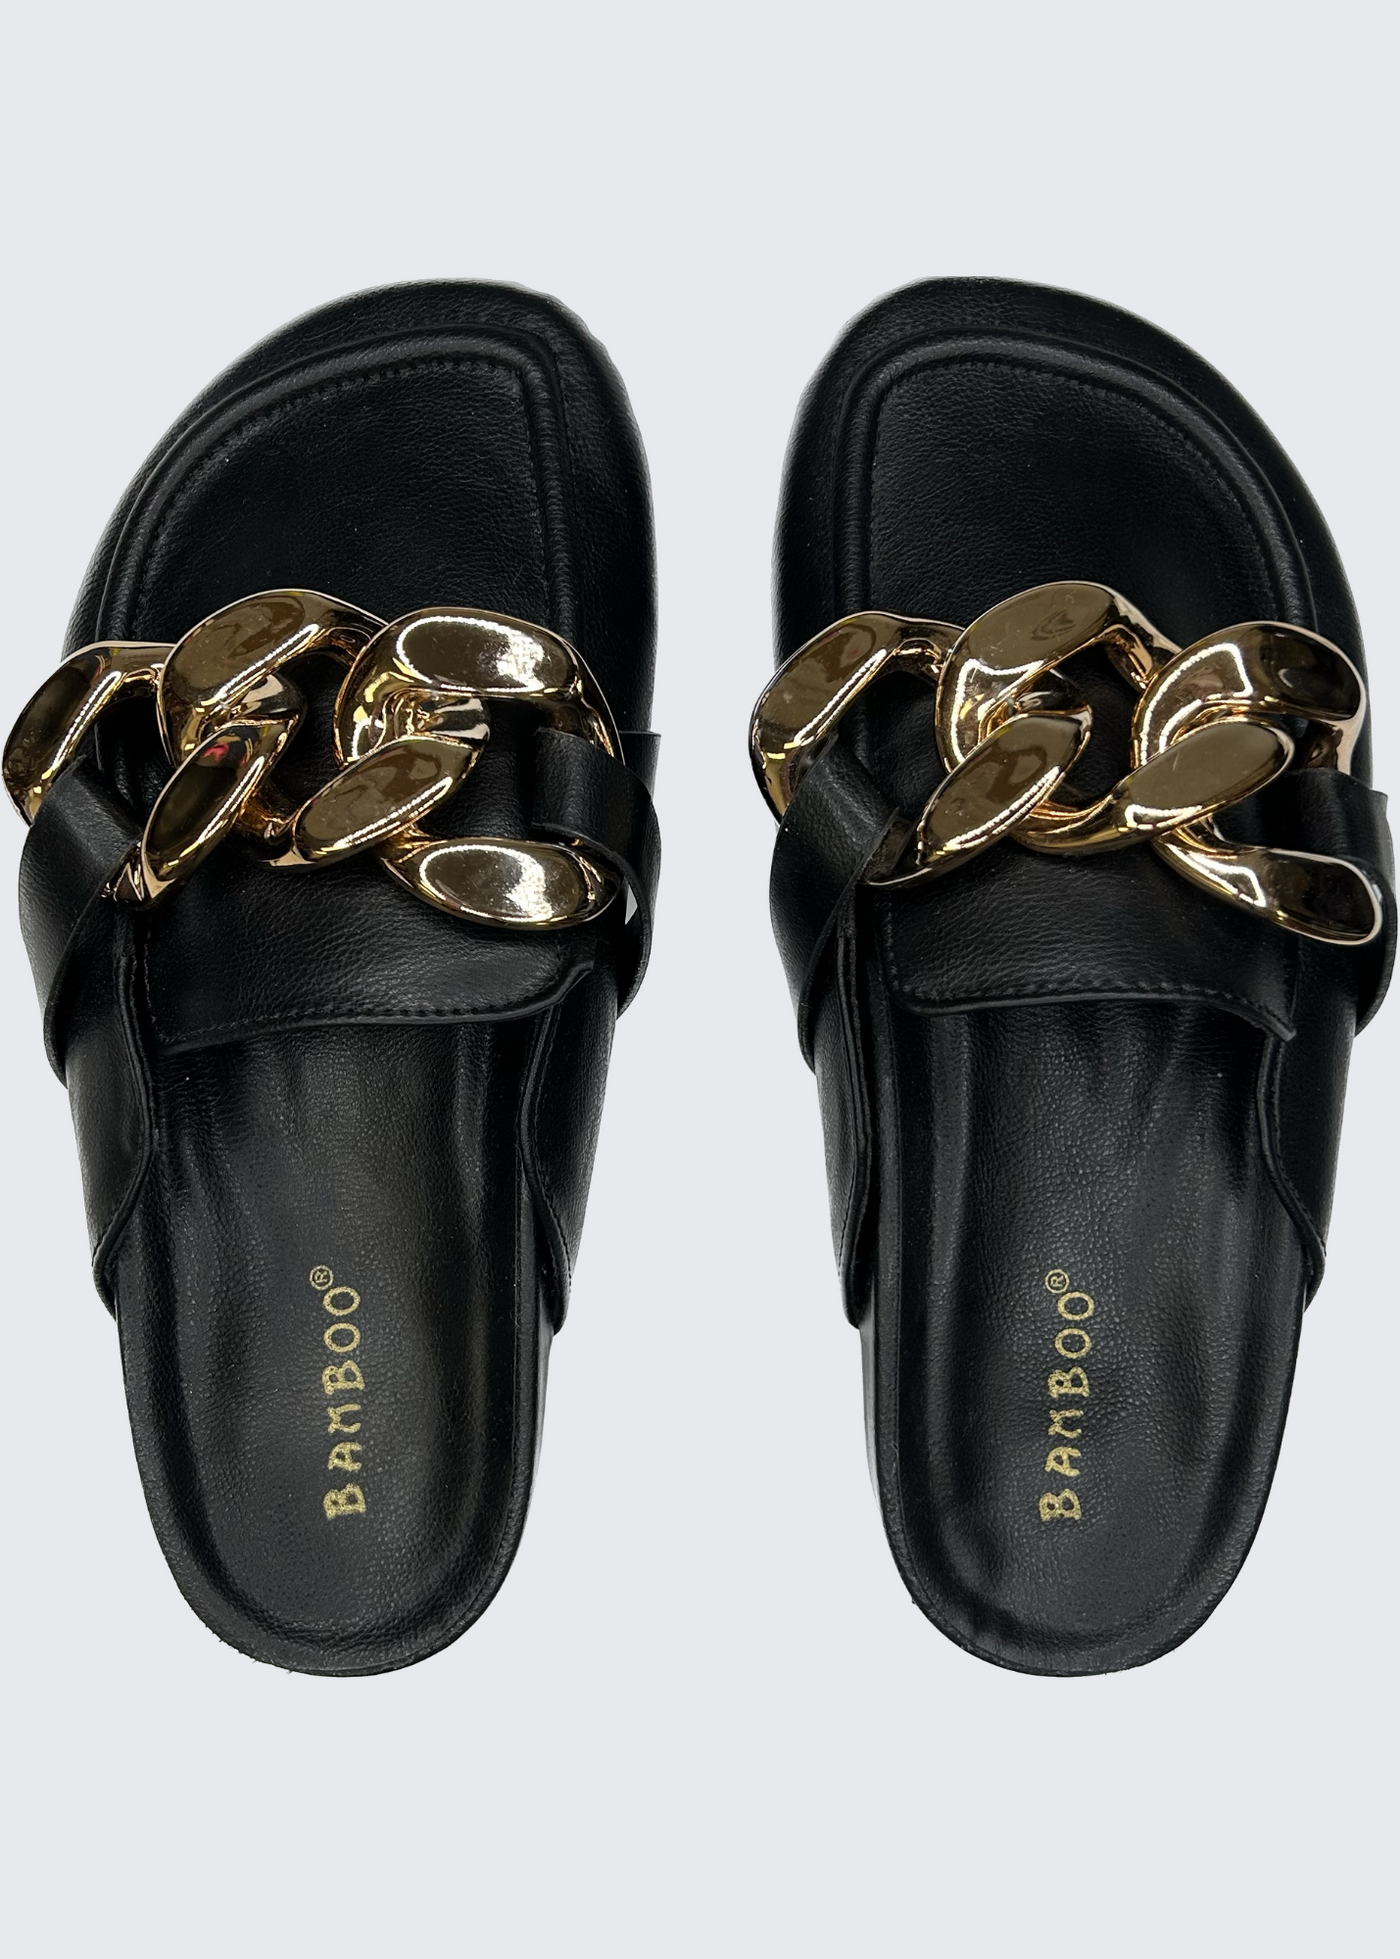 Bamboo Black Closed Toe Slide w/ Thick Chain